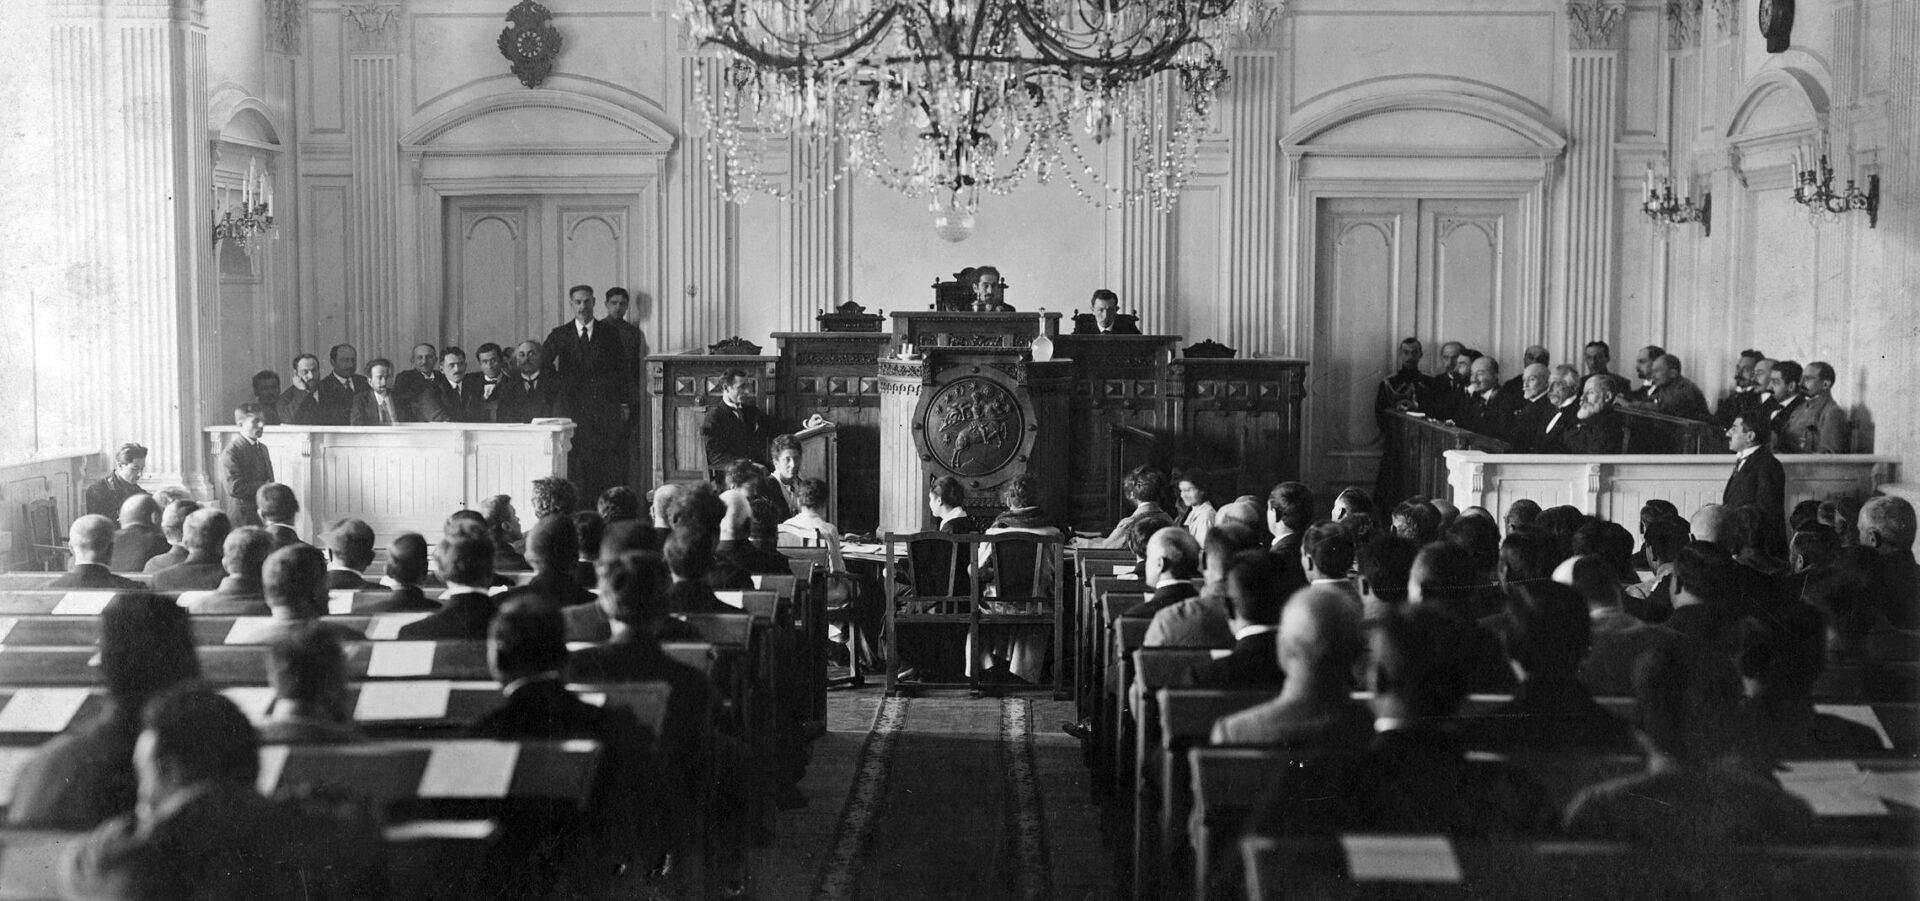 The Constituent Assembly of Georgia